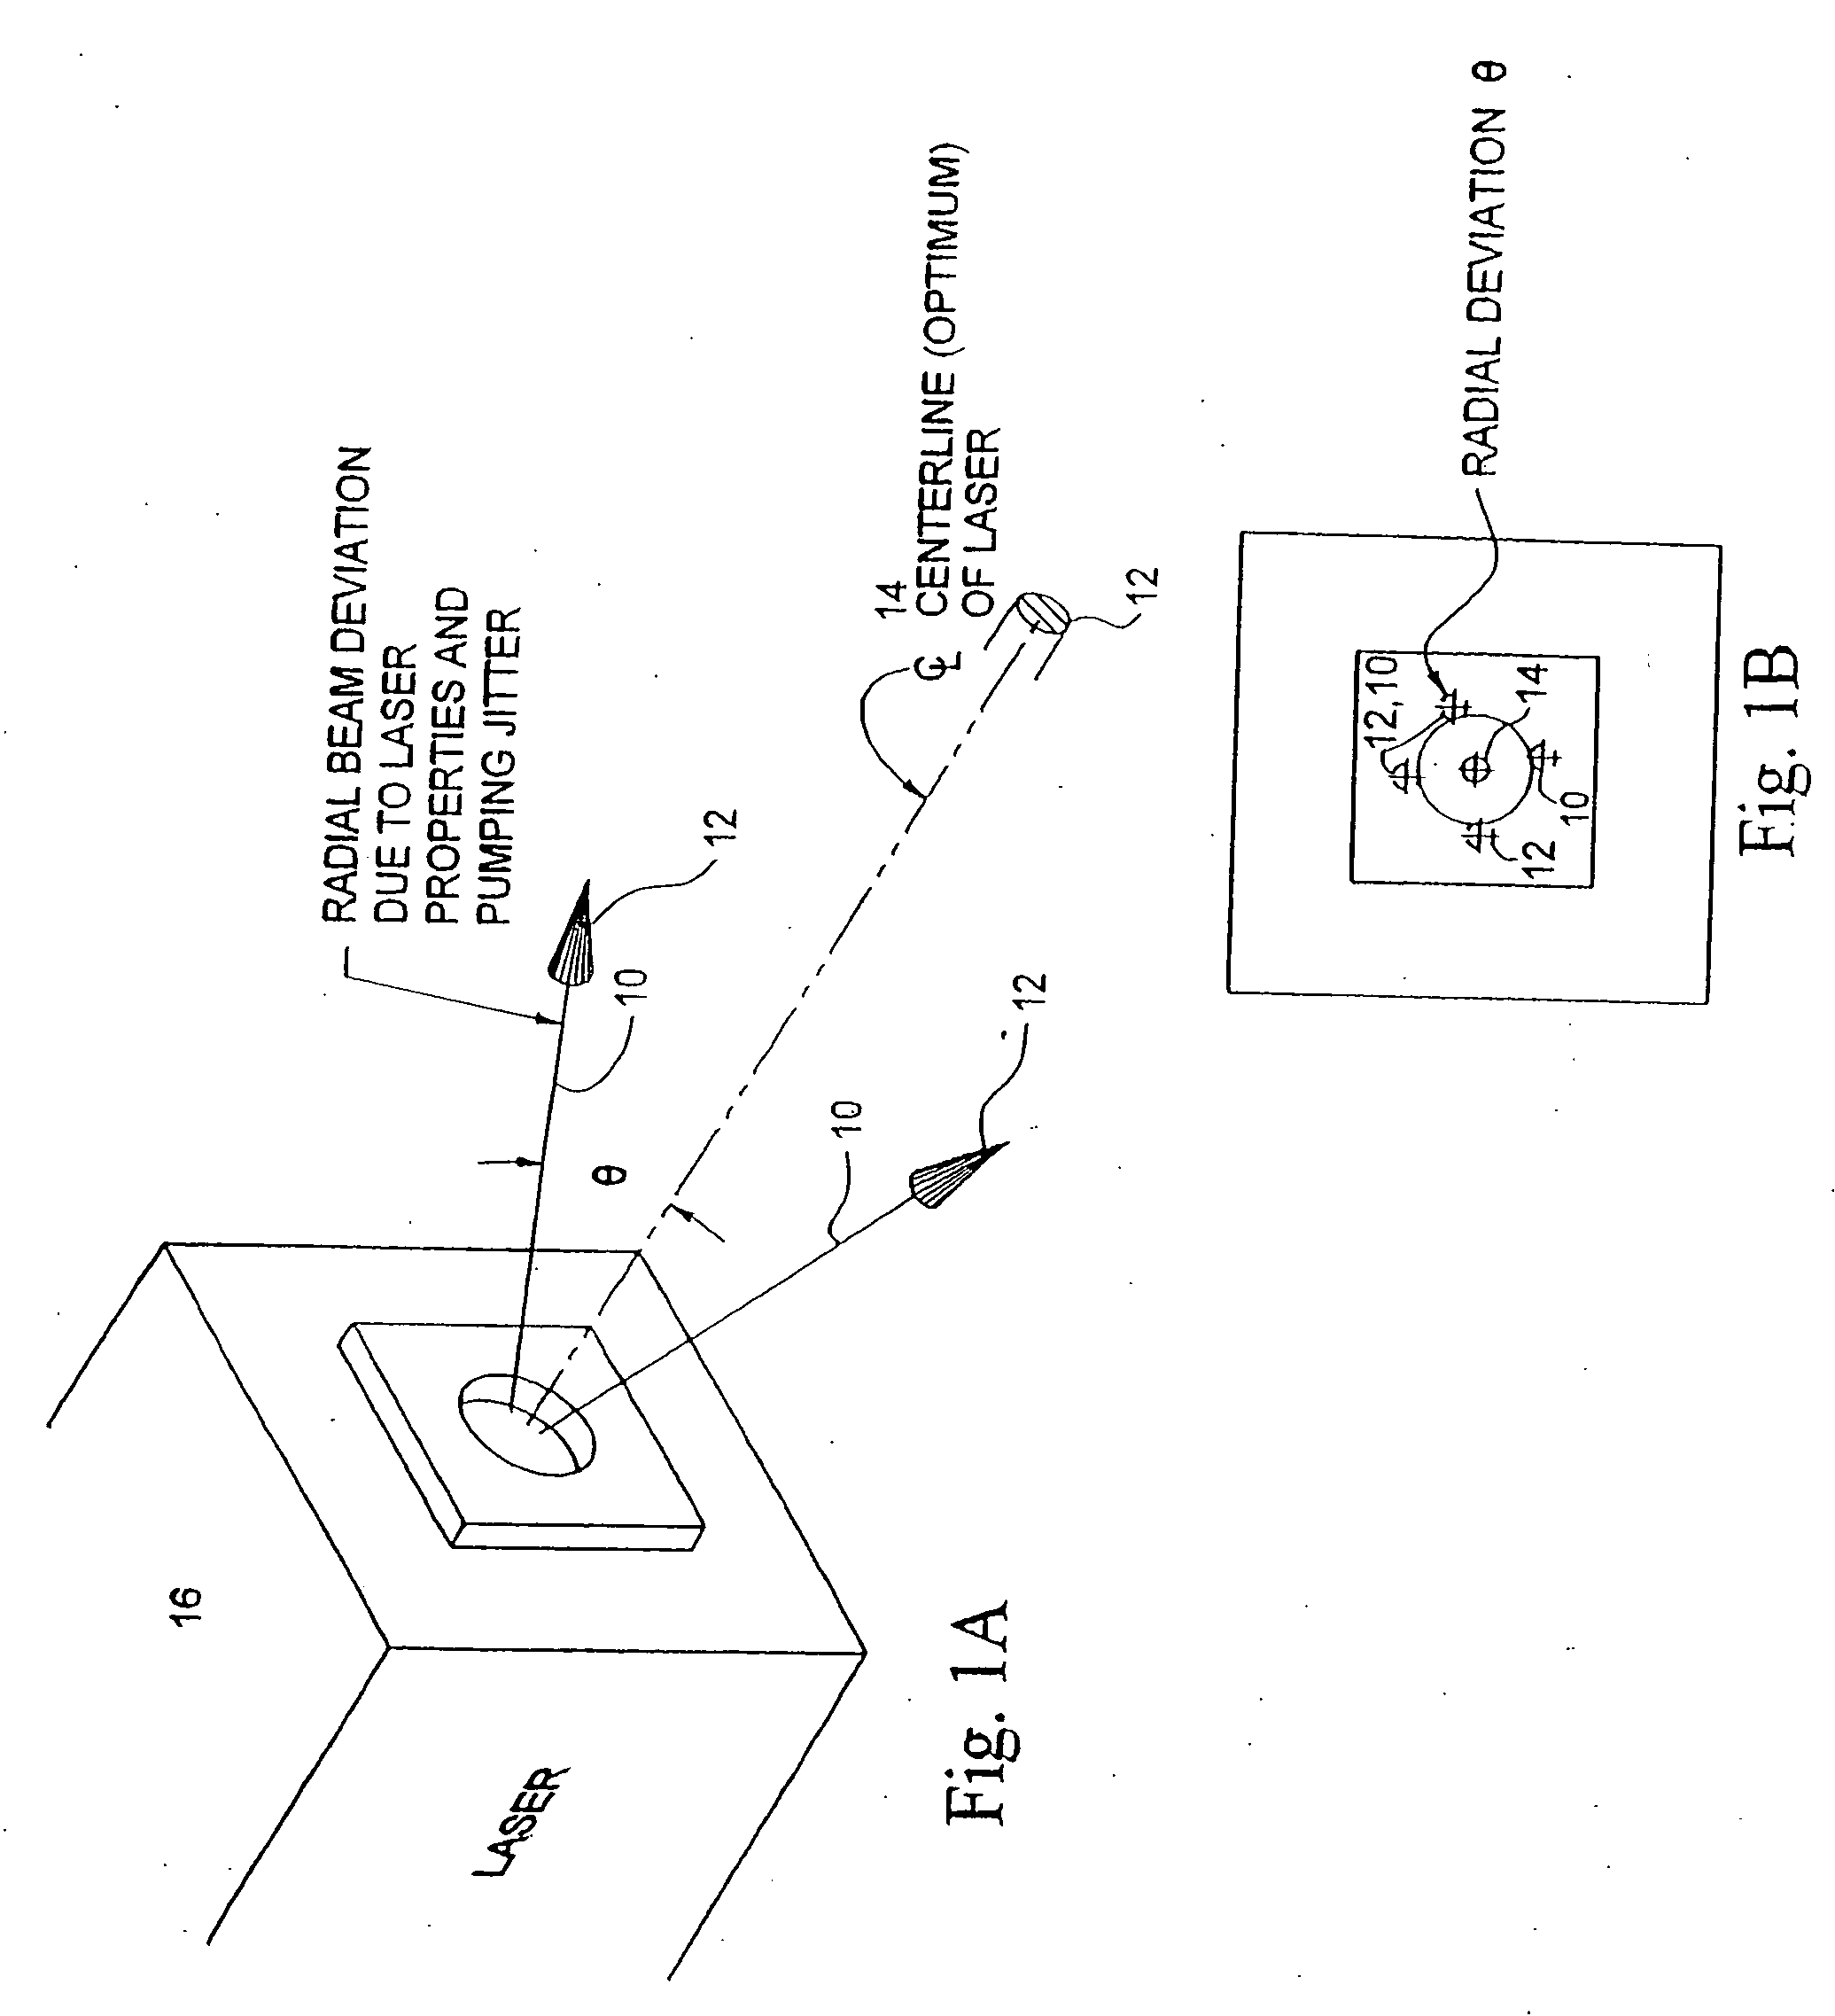 Beam shaping prior to harmonic generation for increased stability of laser beam shaping post harmonic generation with integrated automatic displacement and thermal beam drift compensation